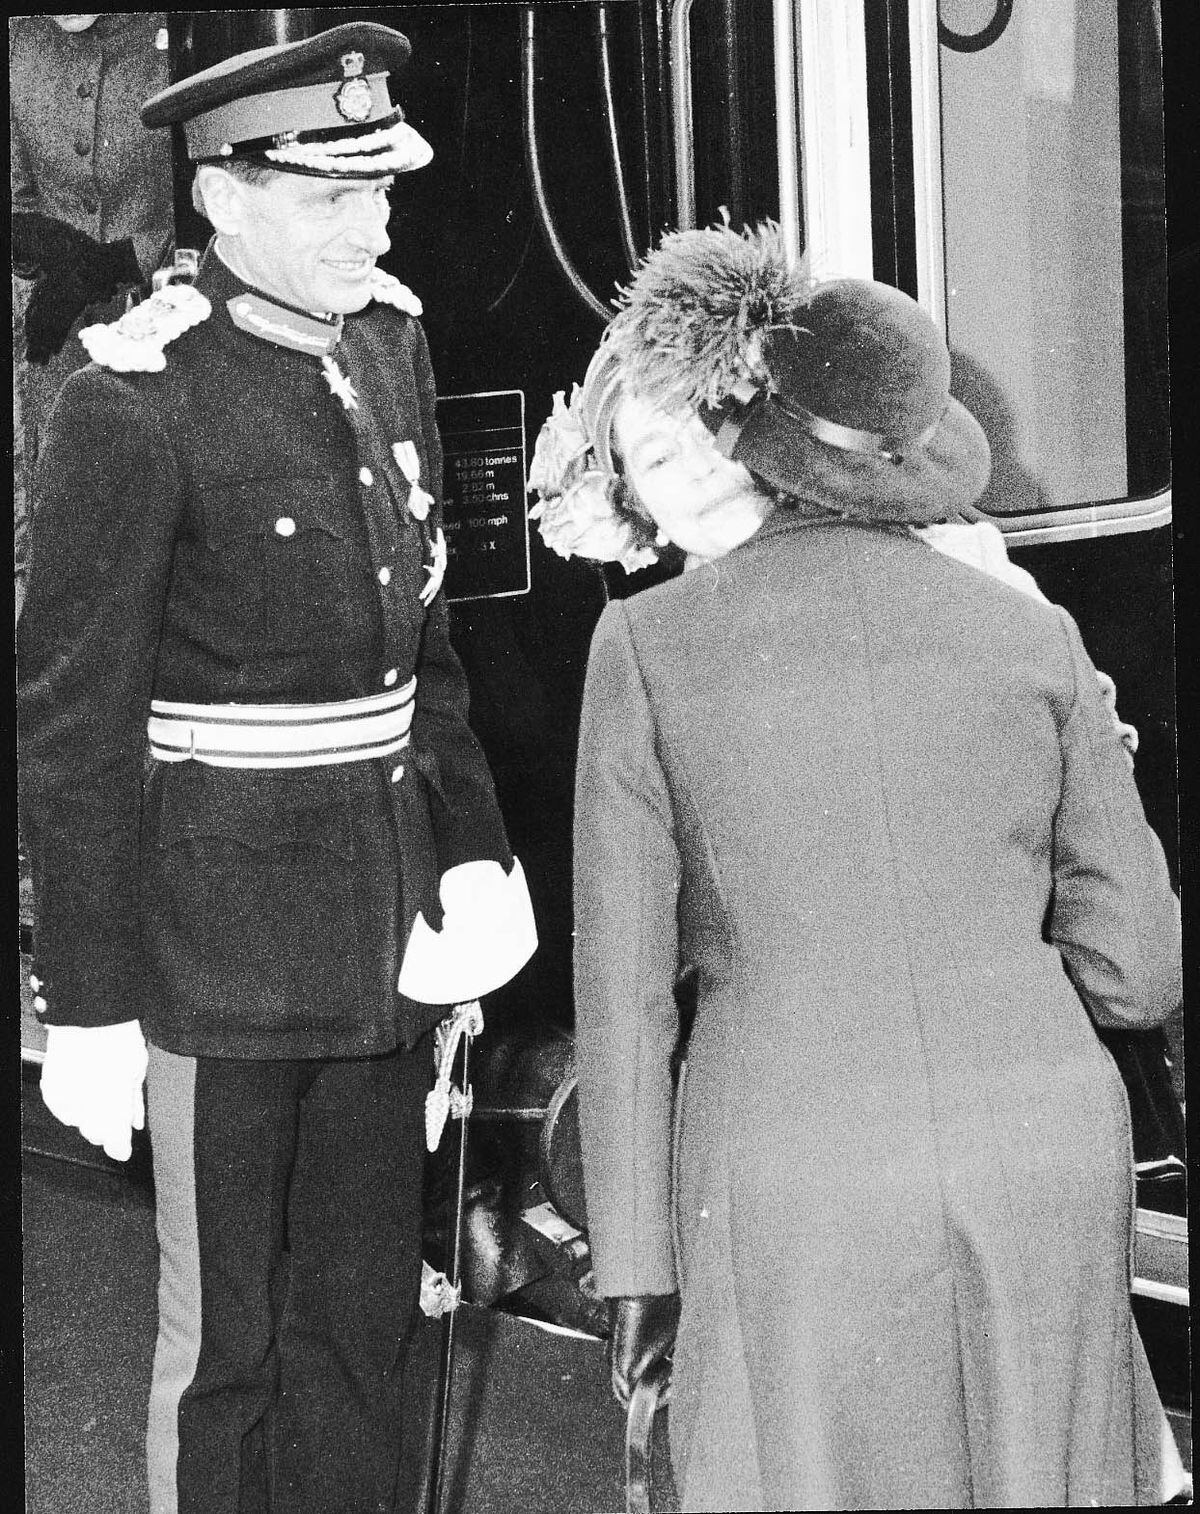 Lady Kathryn Dugdale, a long-time lady in waiting to the Queen, greets Her Majesty as she steps off the train for her visit in 1981 to Telford in 1981